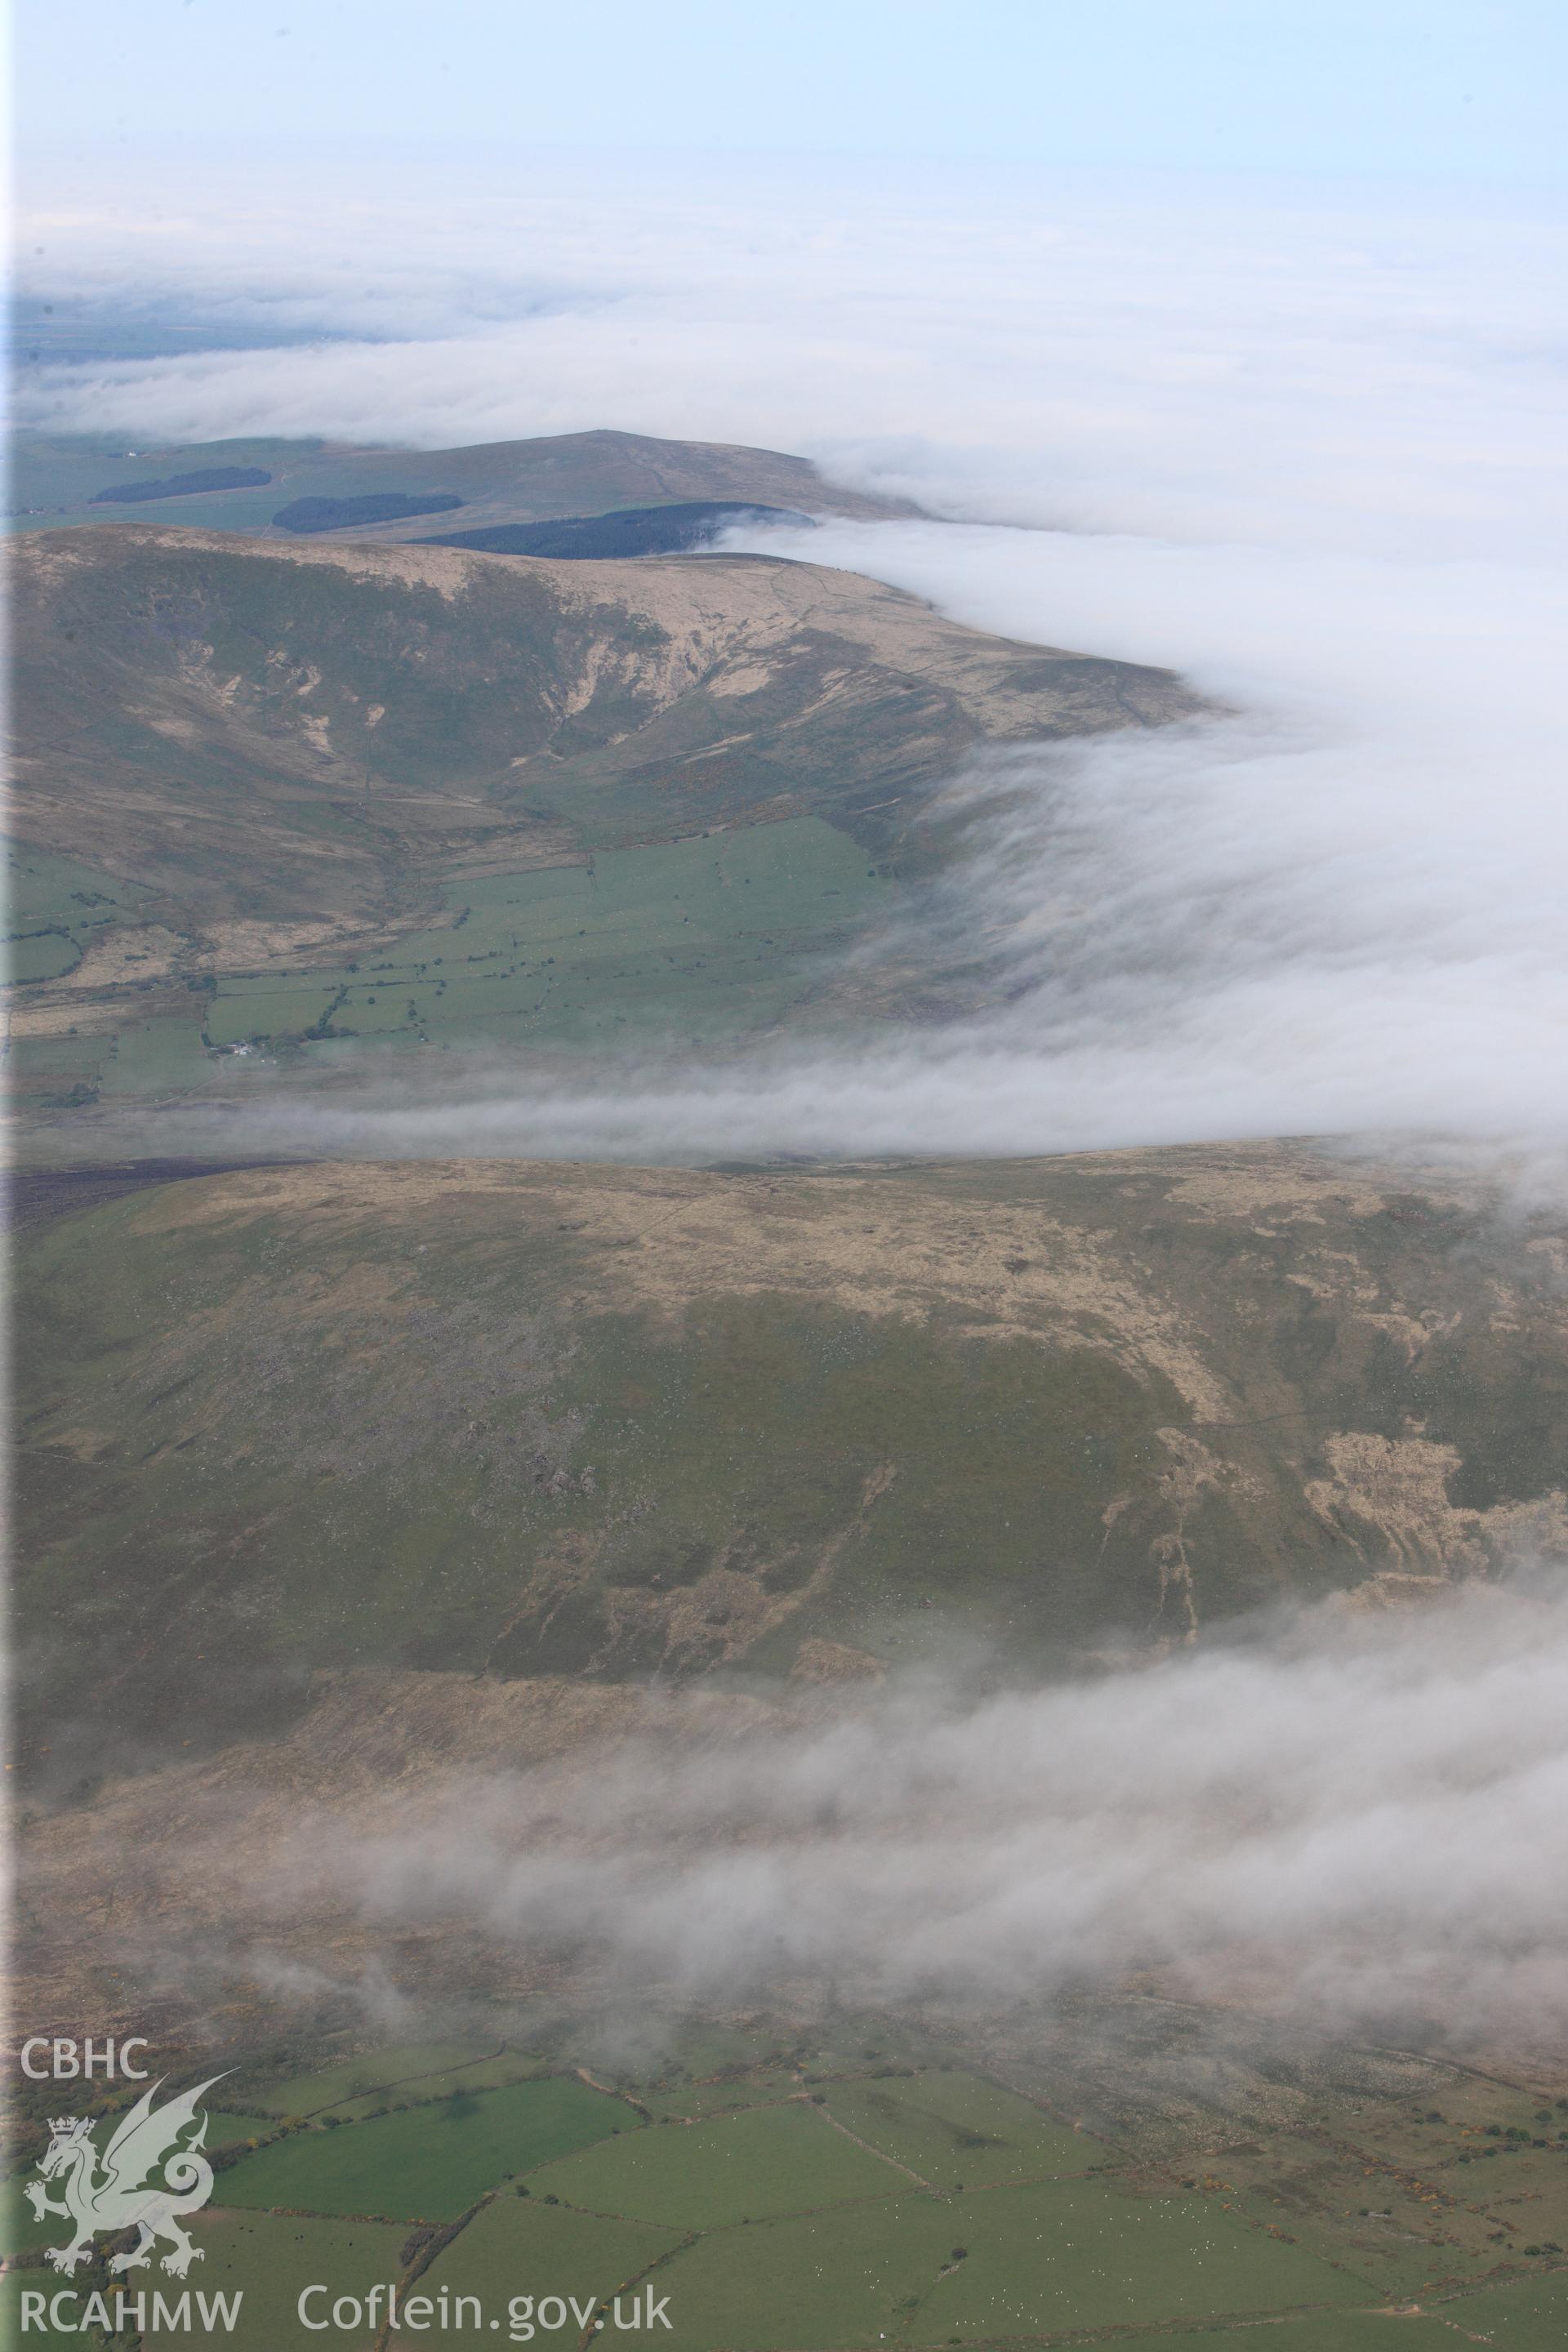 RCAHMW colour oblique photograph of General view looking west towards Carn Bica. Taken by Toby Driver on 24/05/2012.